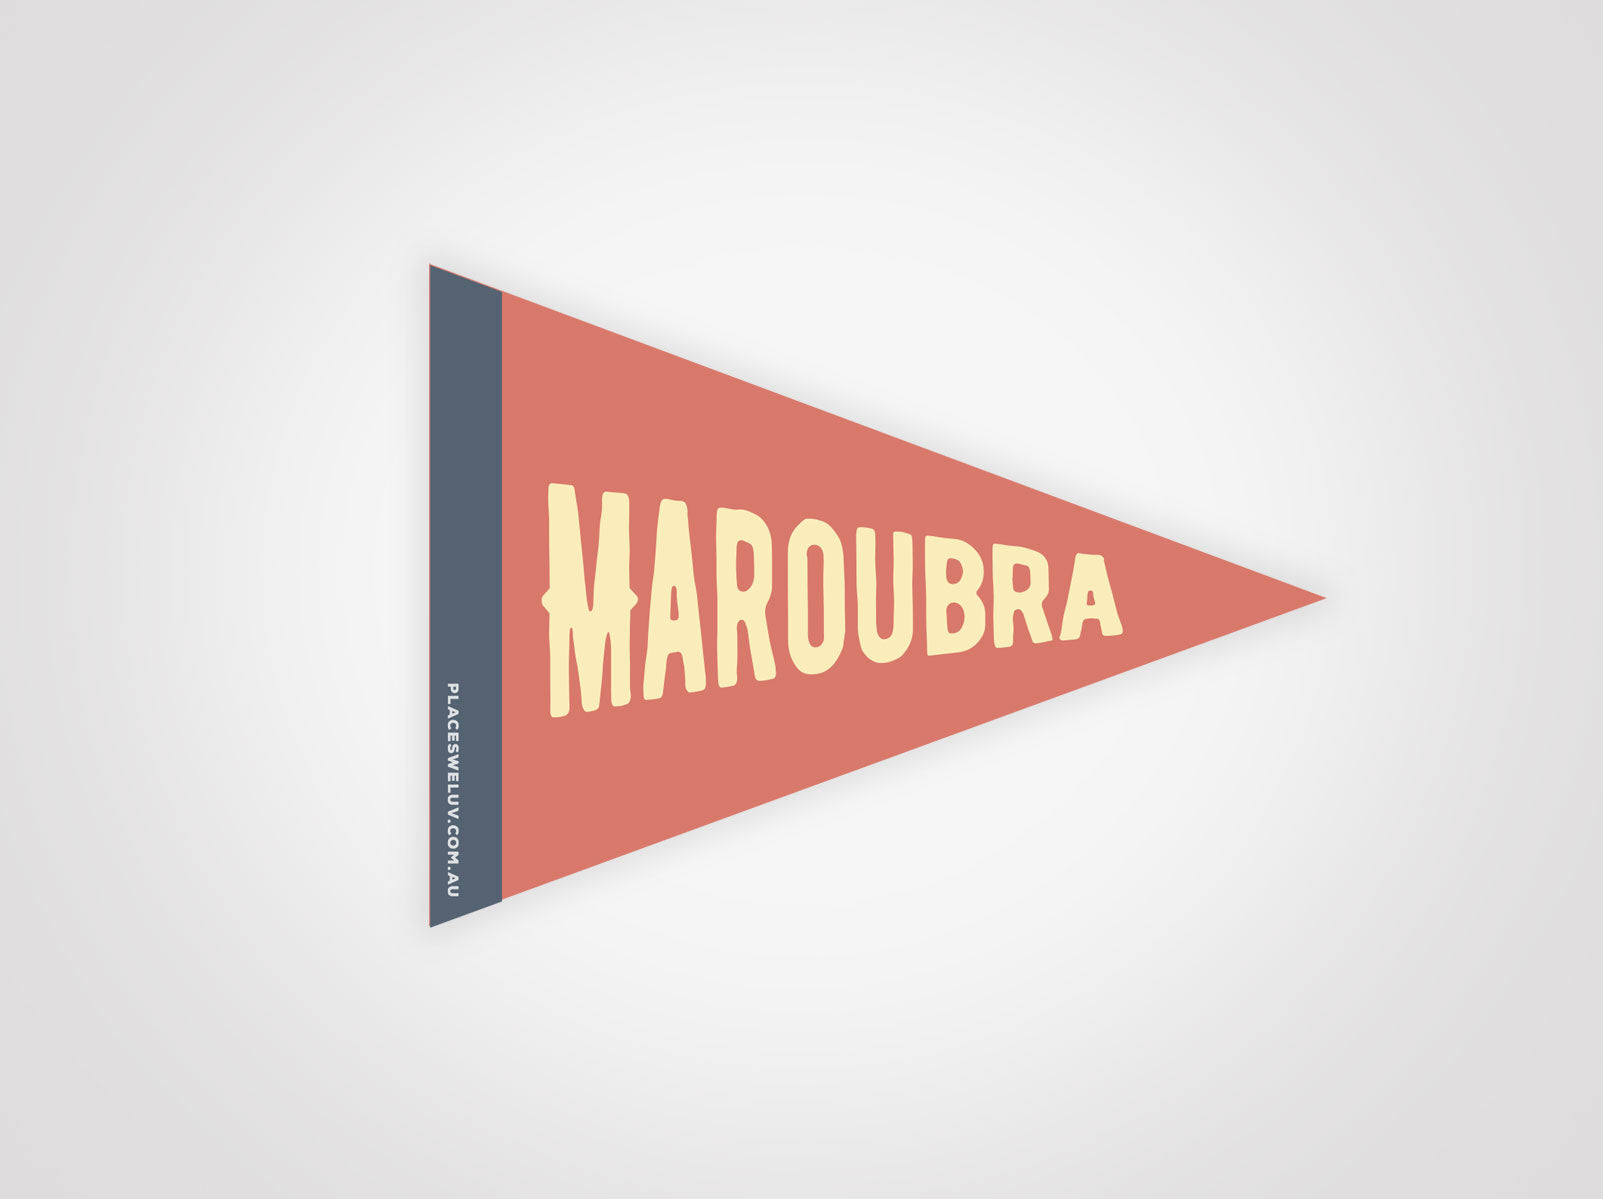 Maroubra retro travel decal by places we luv